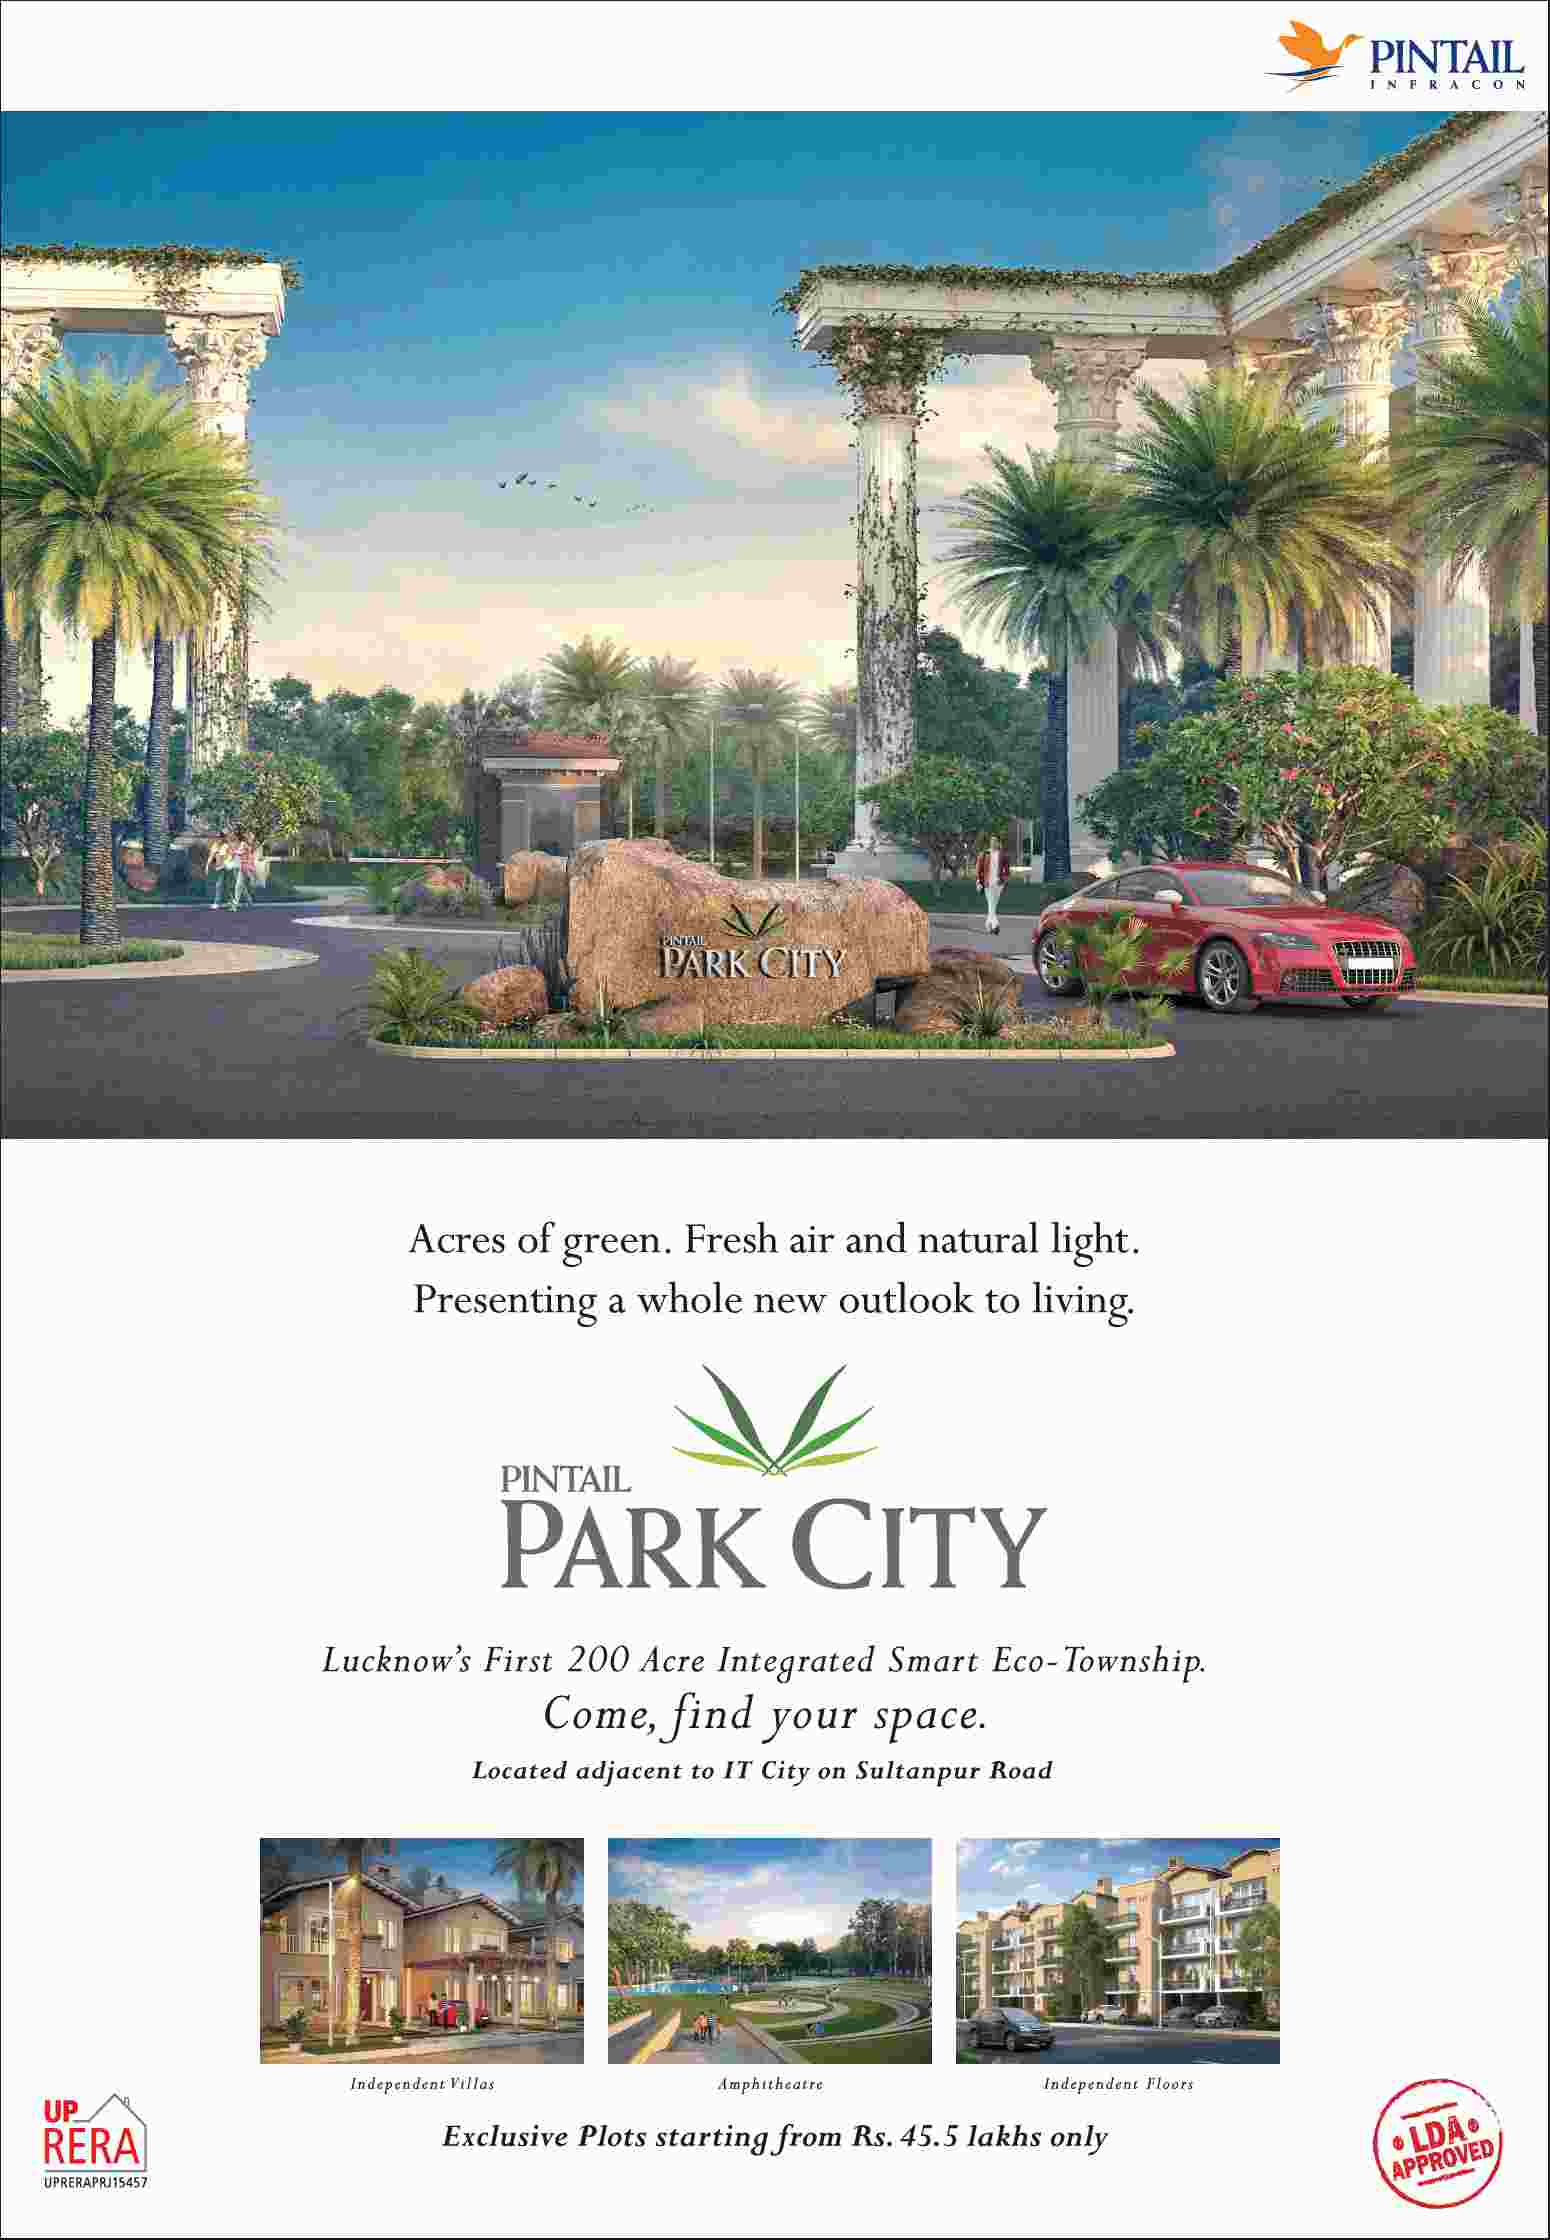 Book exclusive plots starting from Rs. 45.5 Lacs at Pintail Park City in Lucknow Update